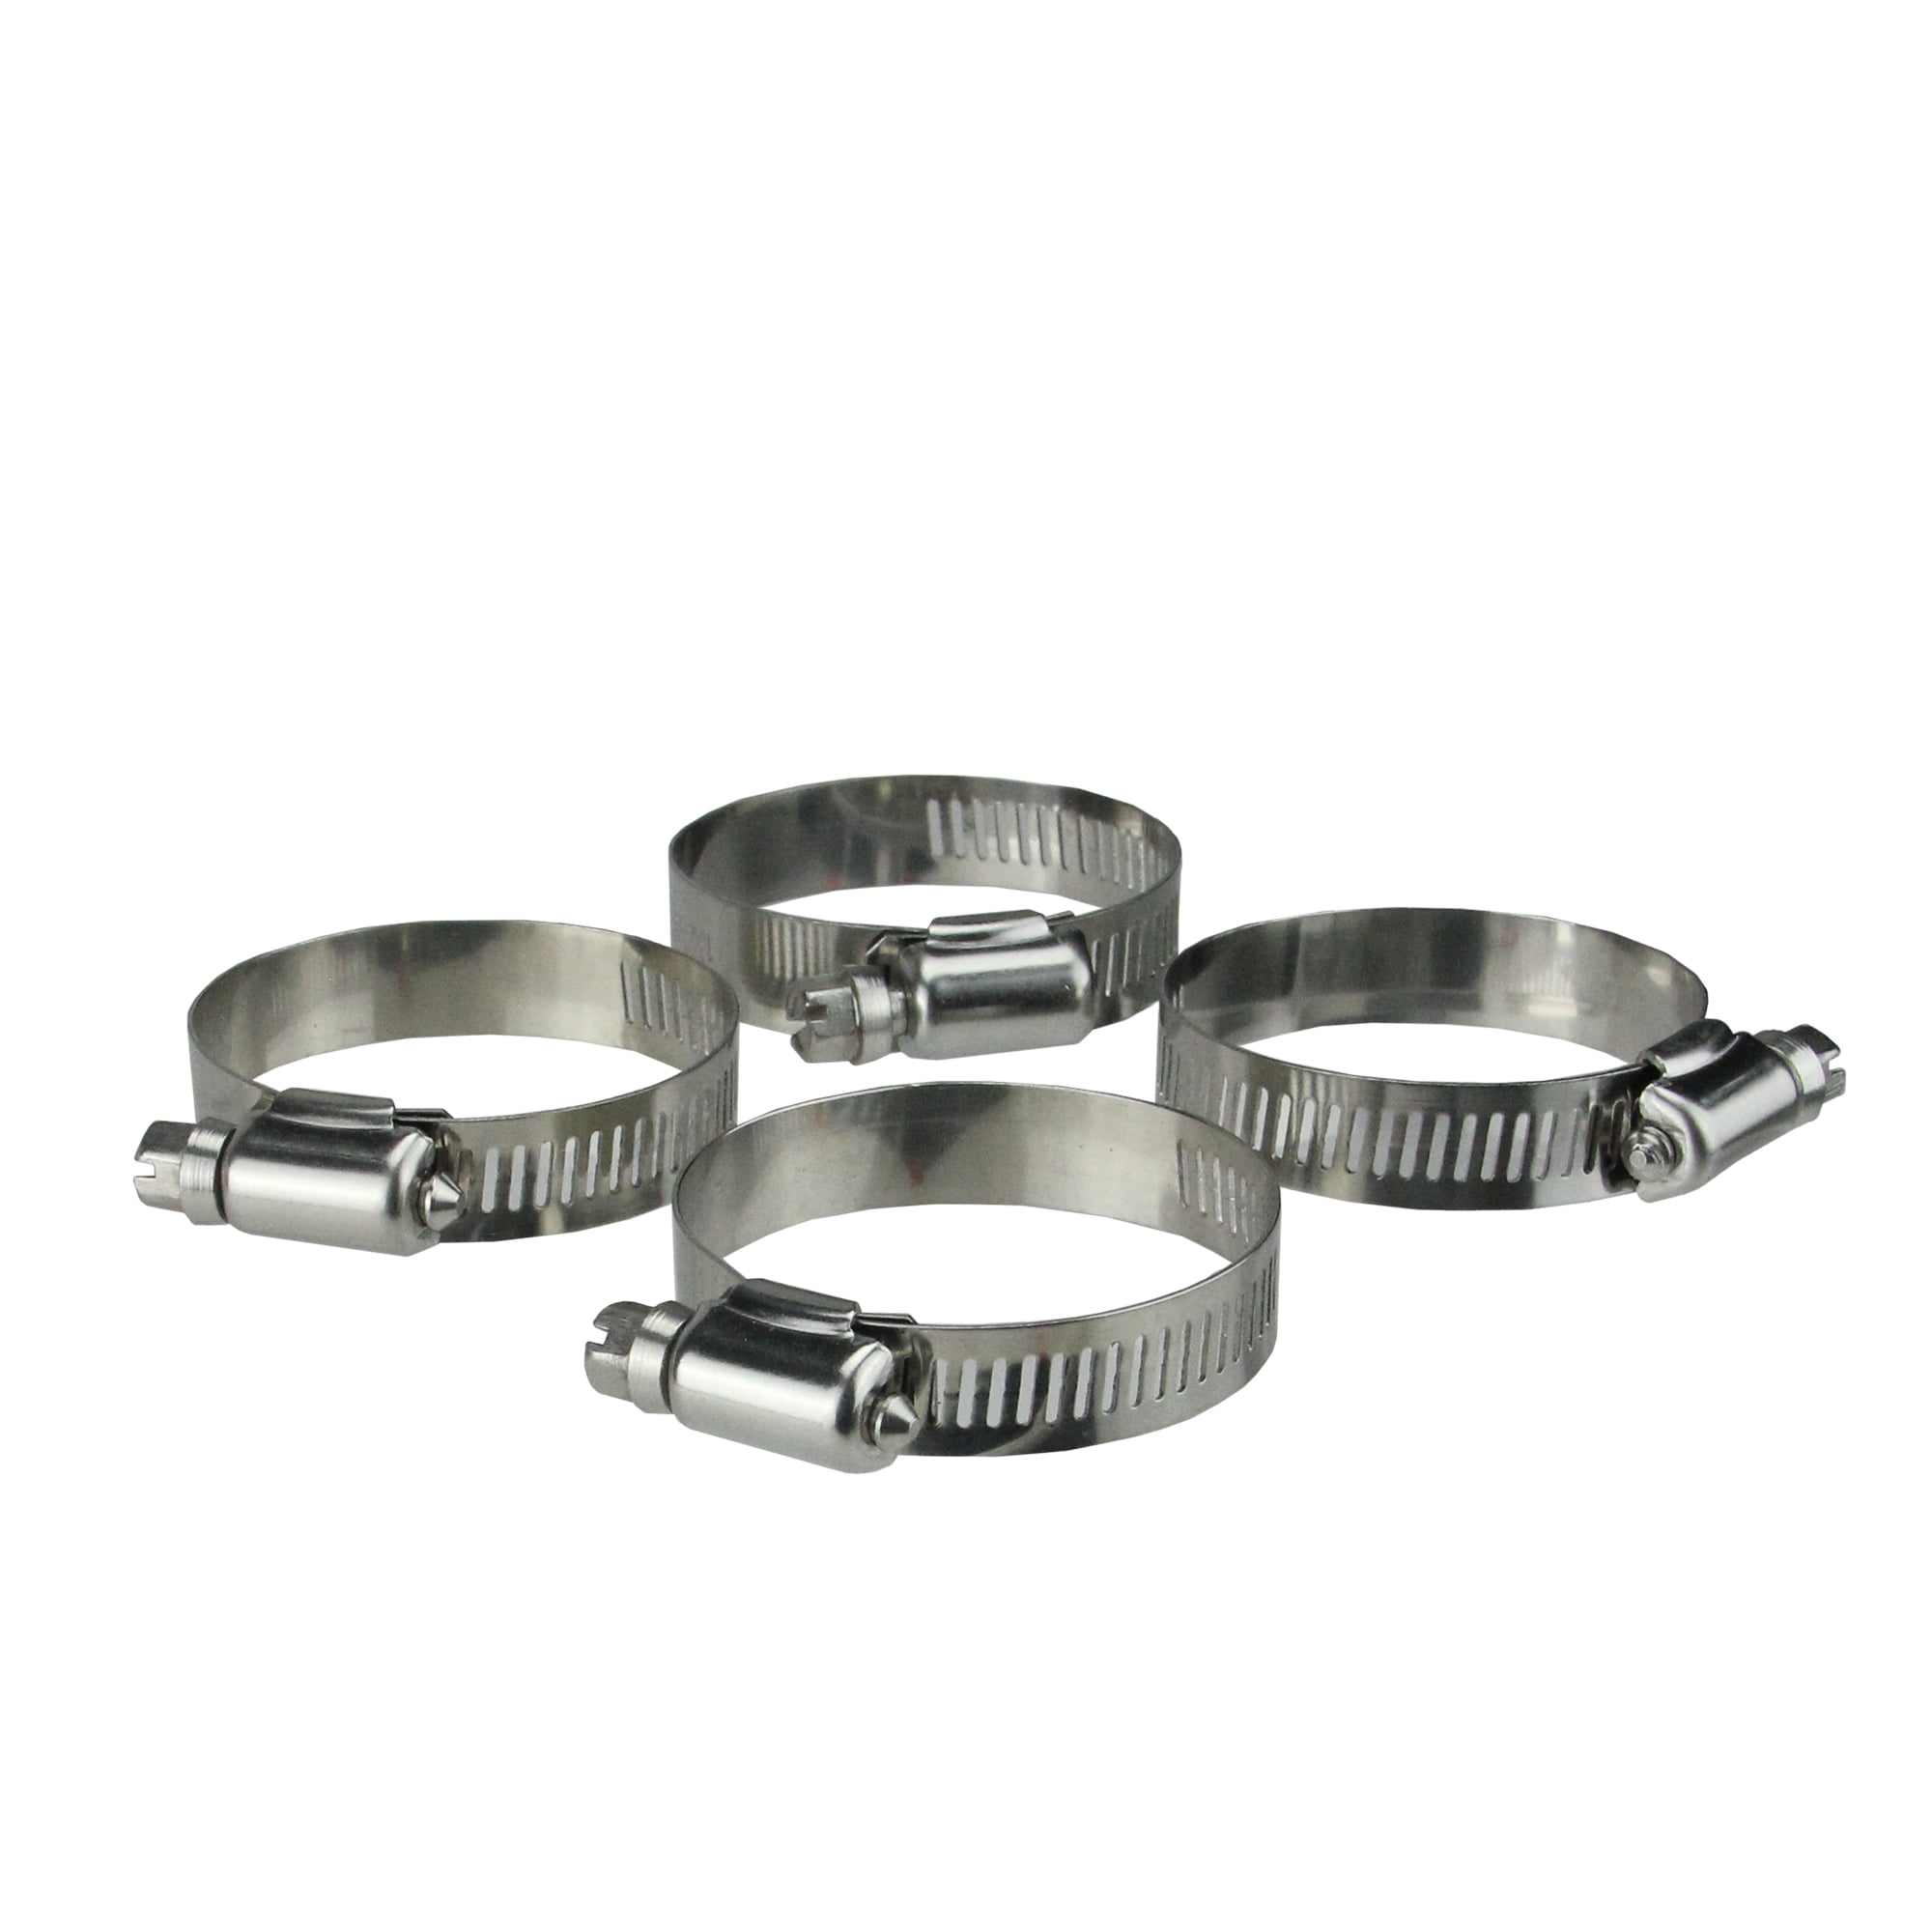 11/16" 10 PIECE PACK MARINE GRADE STAINLESS STEEL HOSE CLAMP 1-1/2" = 21-38mm 